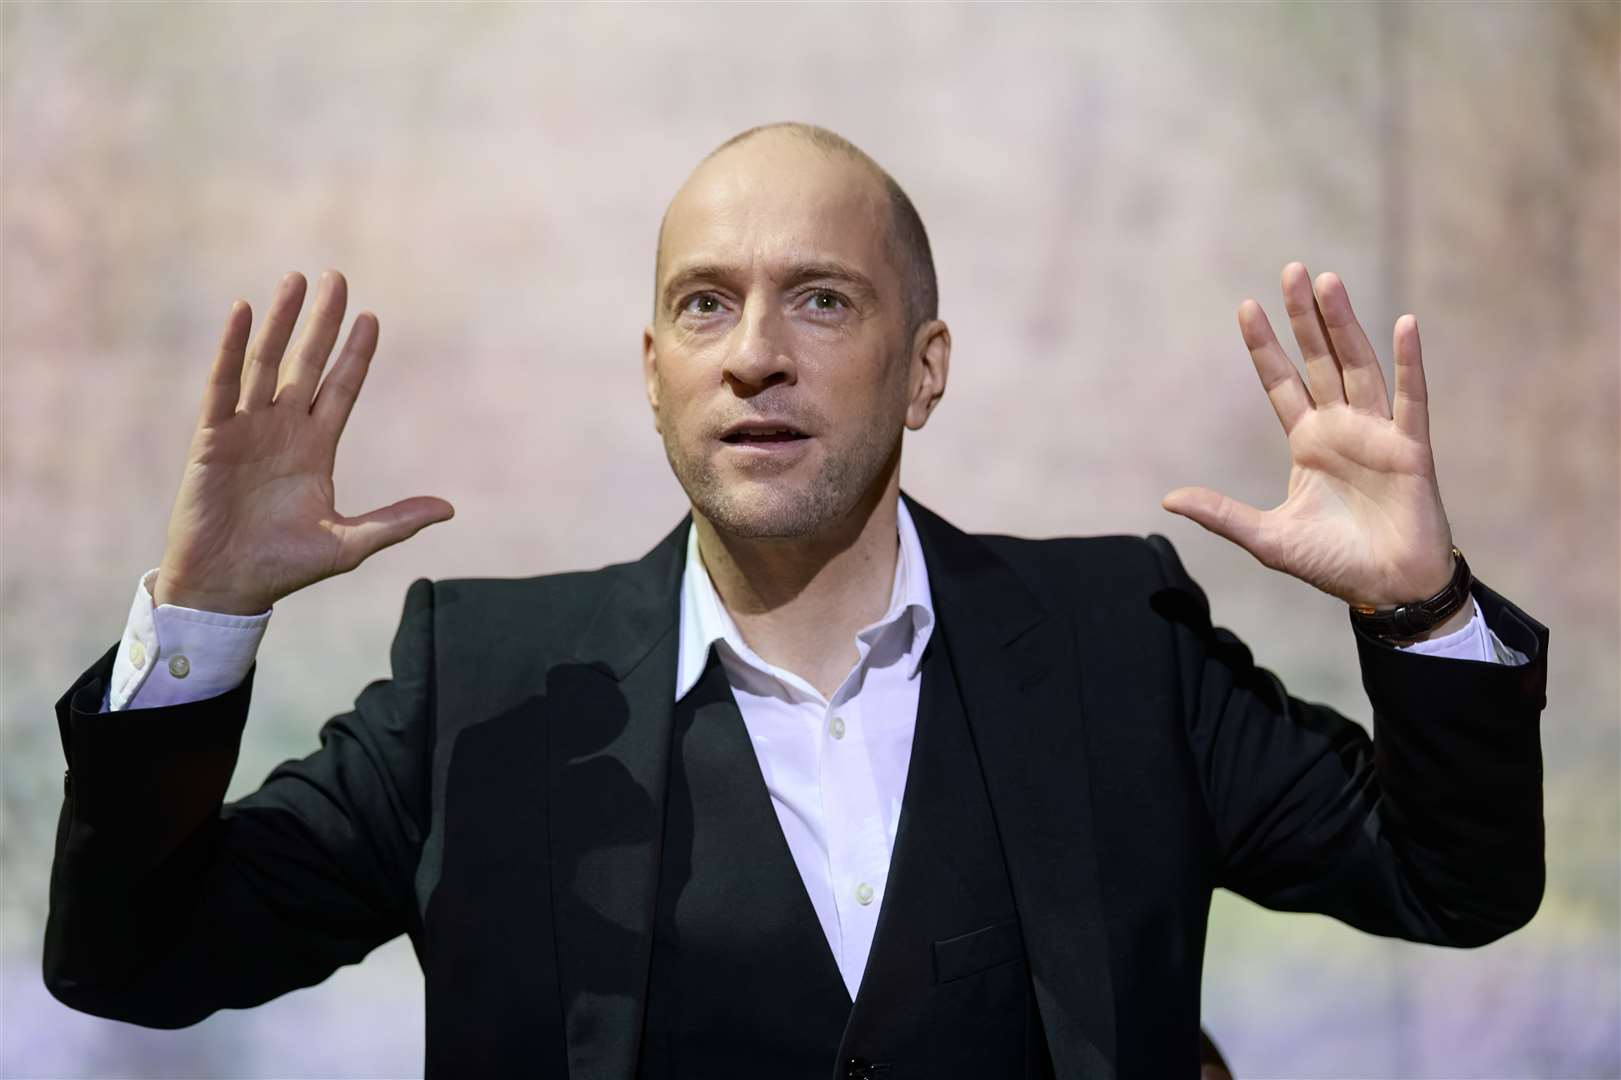 Derren Brown is back with Showman Picture: Mark Douet